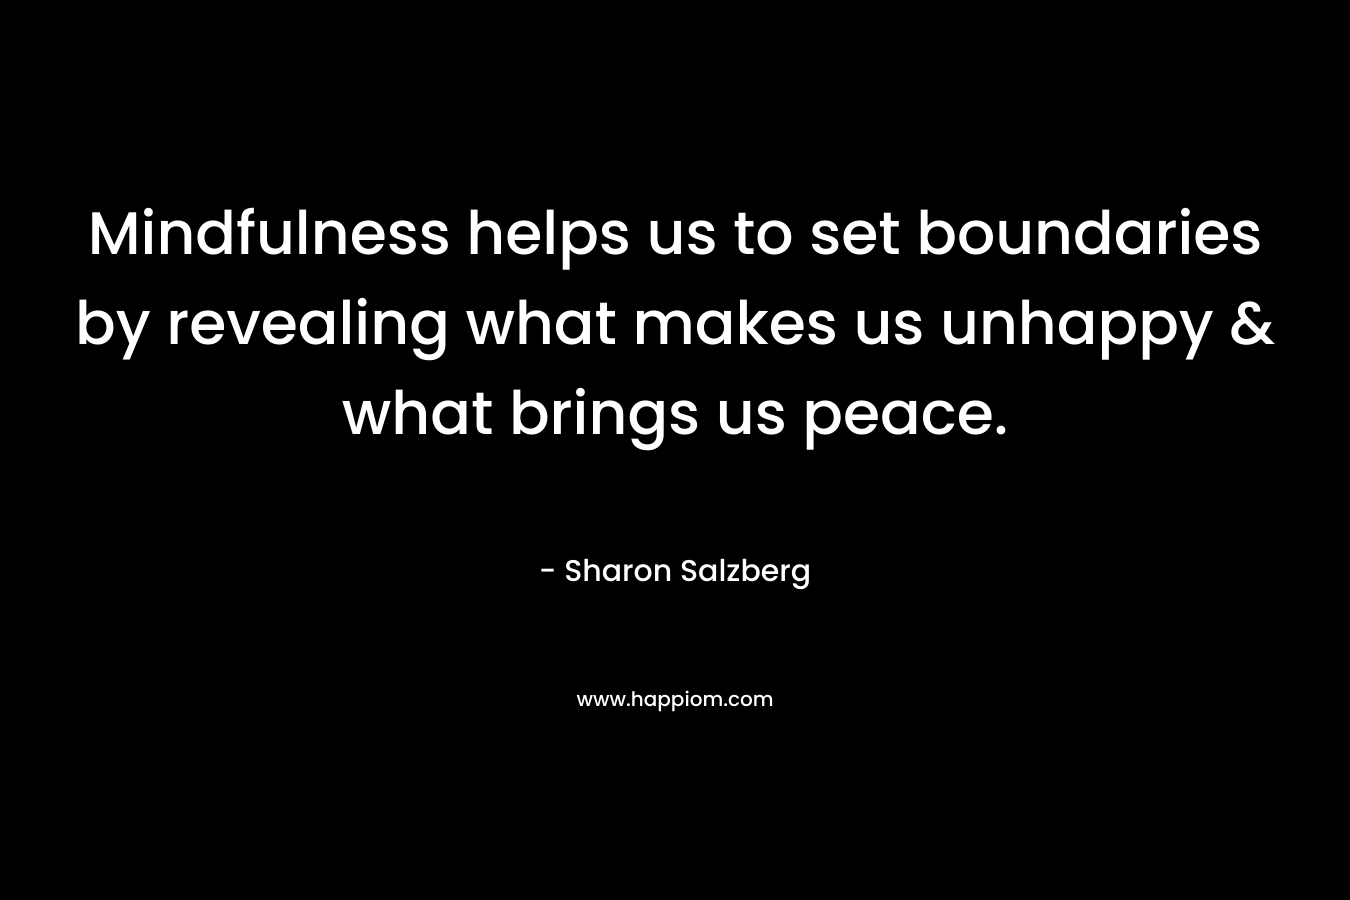 Mindfulness helps us to set boundaries by revealing what makes us unhappy & what brings us peace.